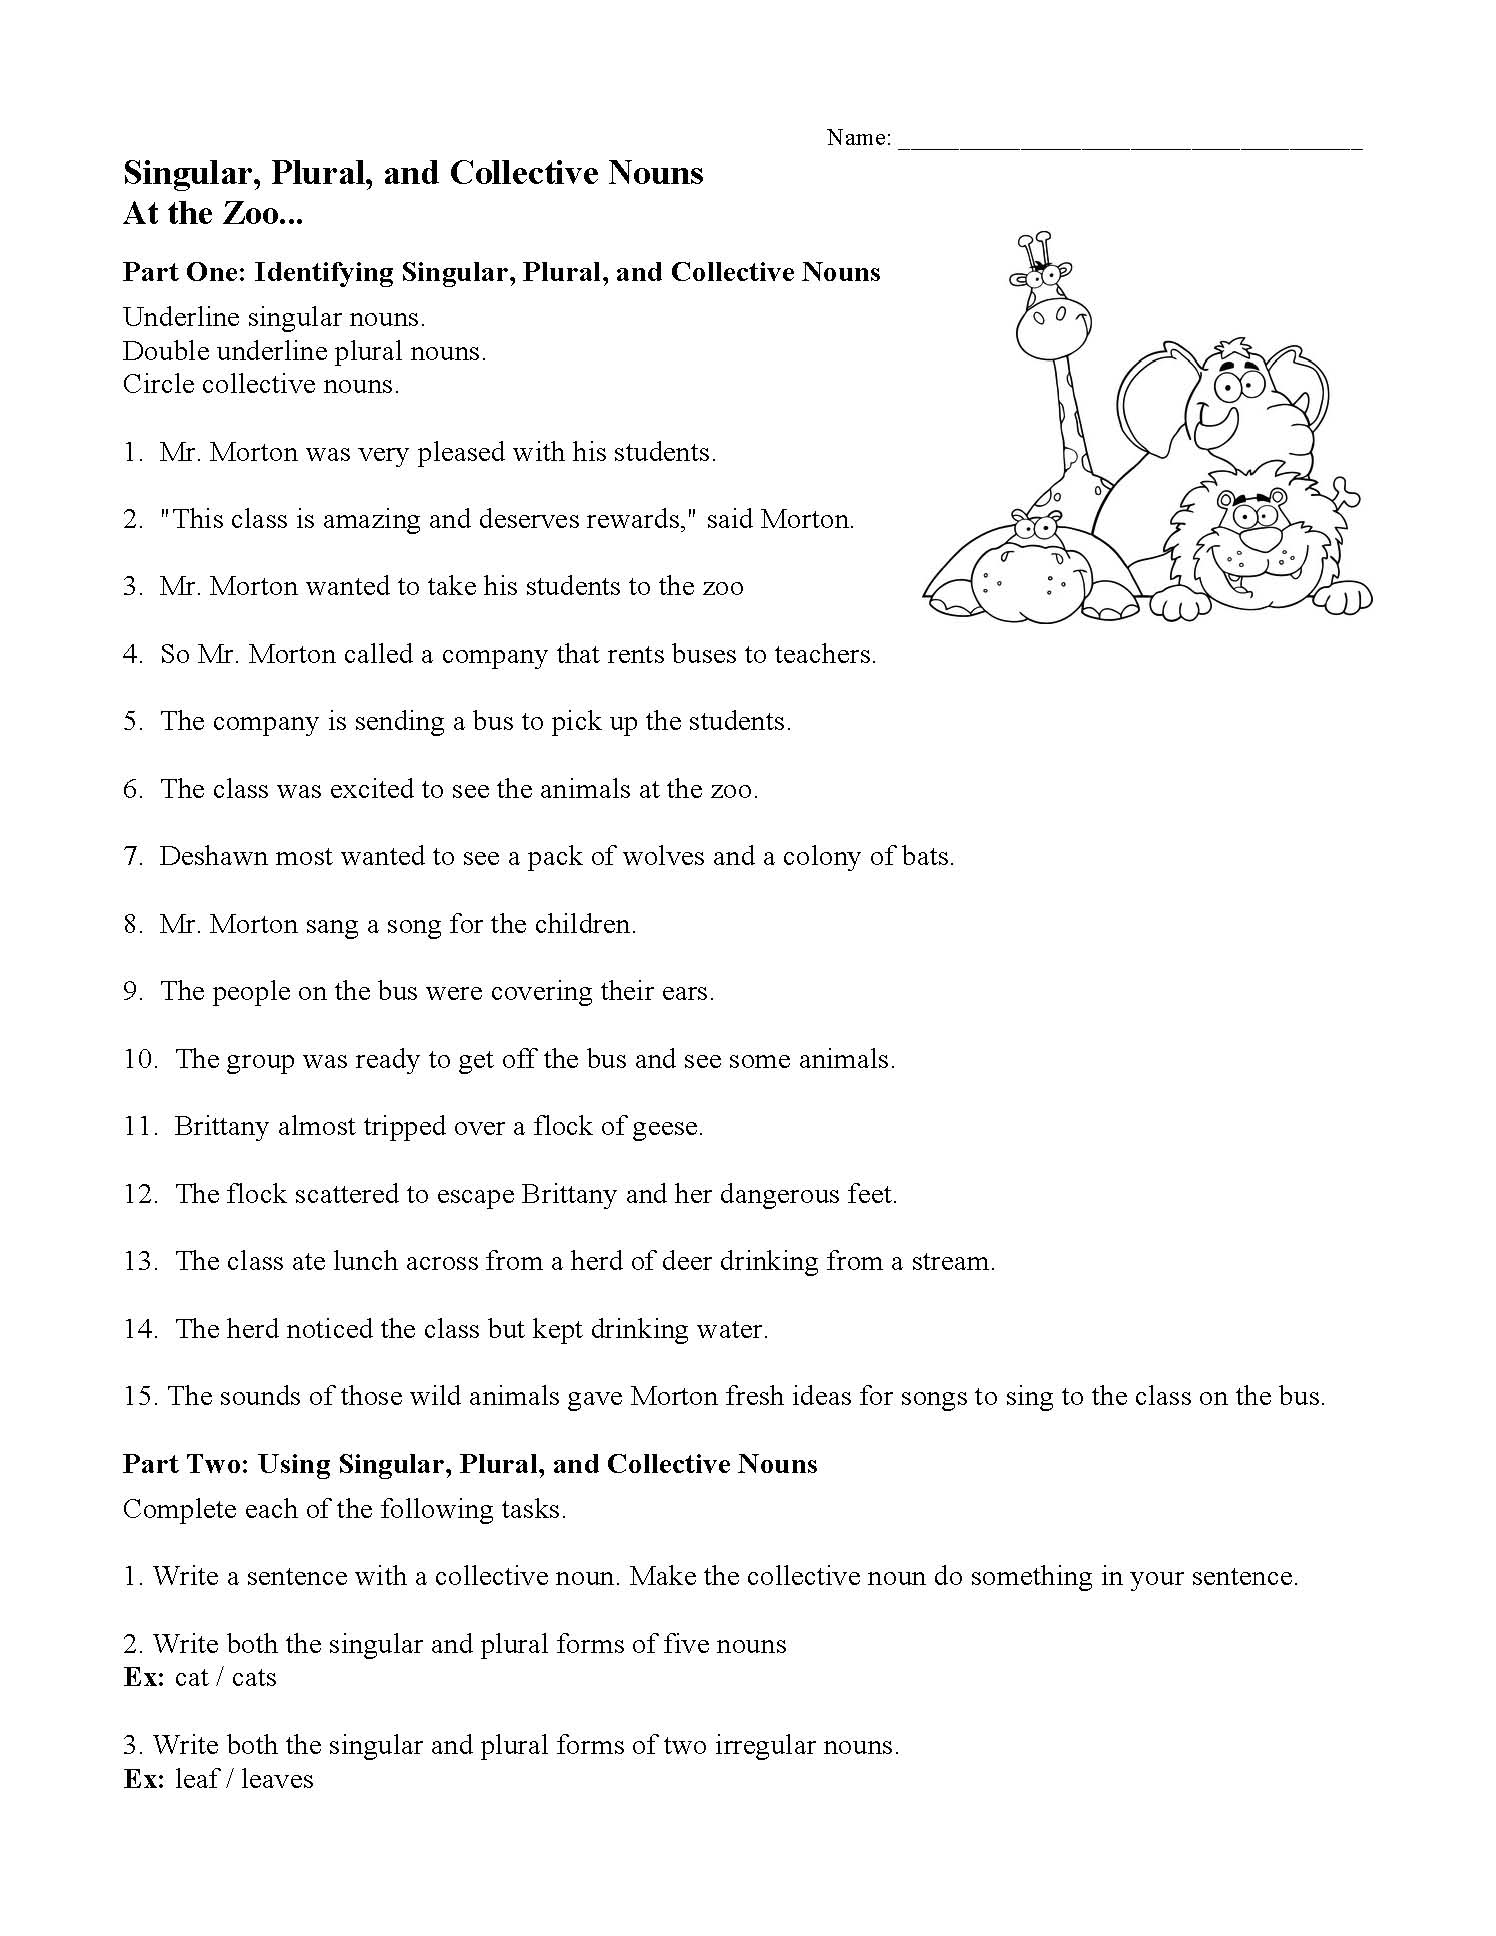 This is a preview image of the Singular, Plural, and Collective Nouns Worksheet.